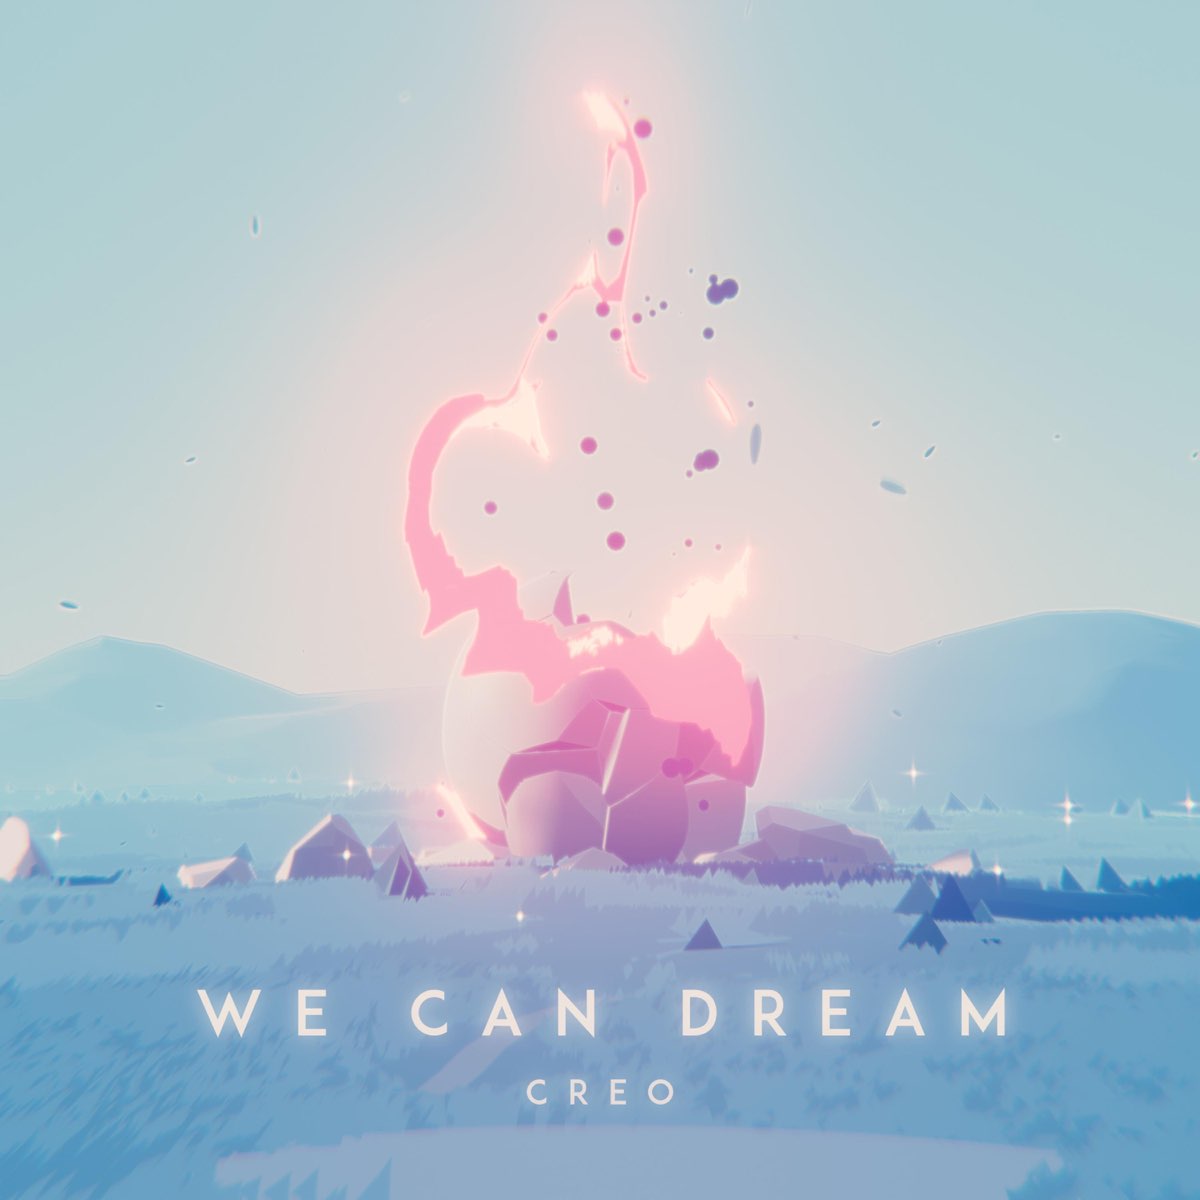 You can dream my dream. Creo we can Dream. Превью Dream. Creo artist. Creo we can Dream Preview.